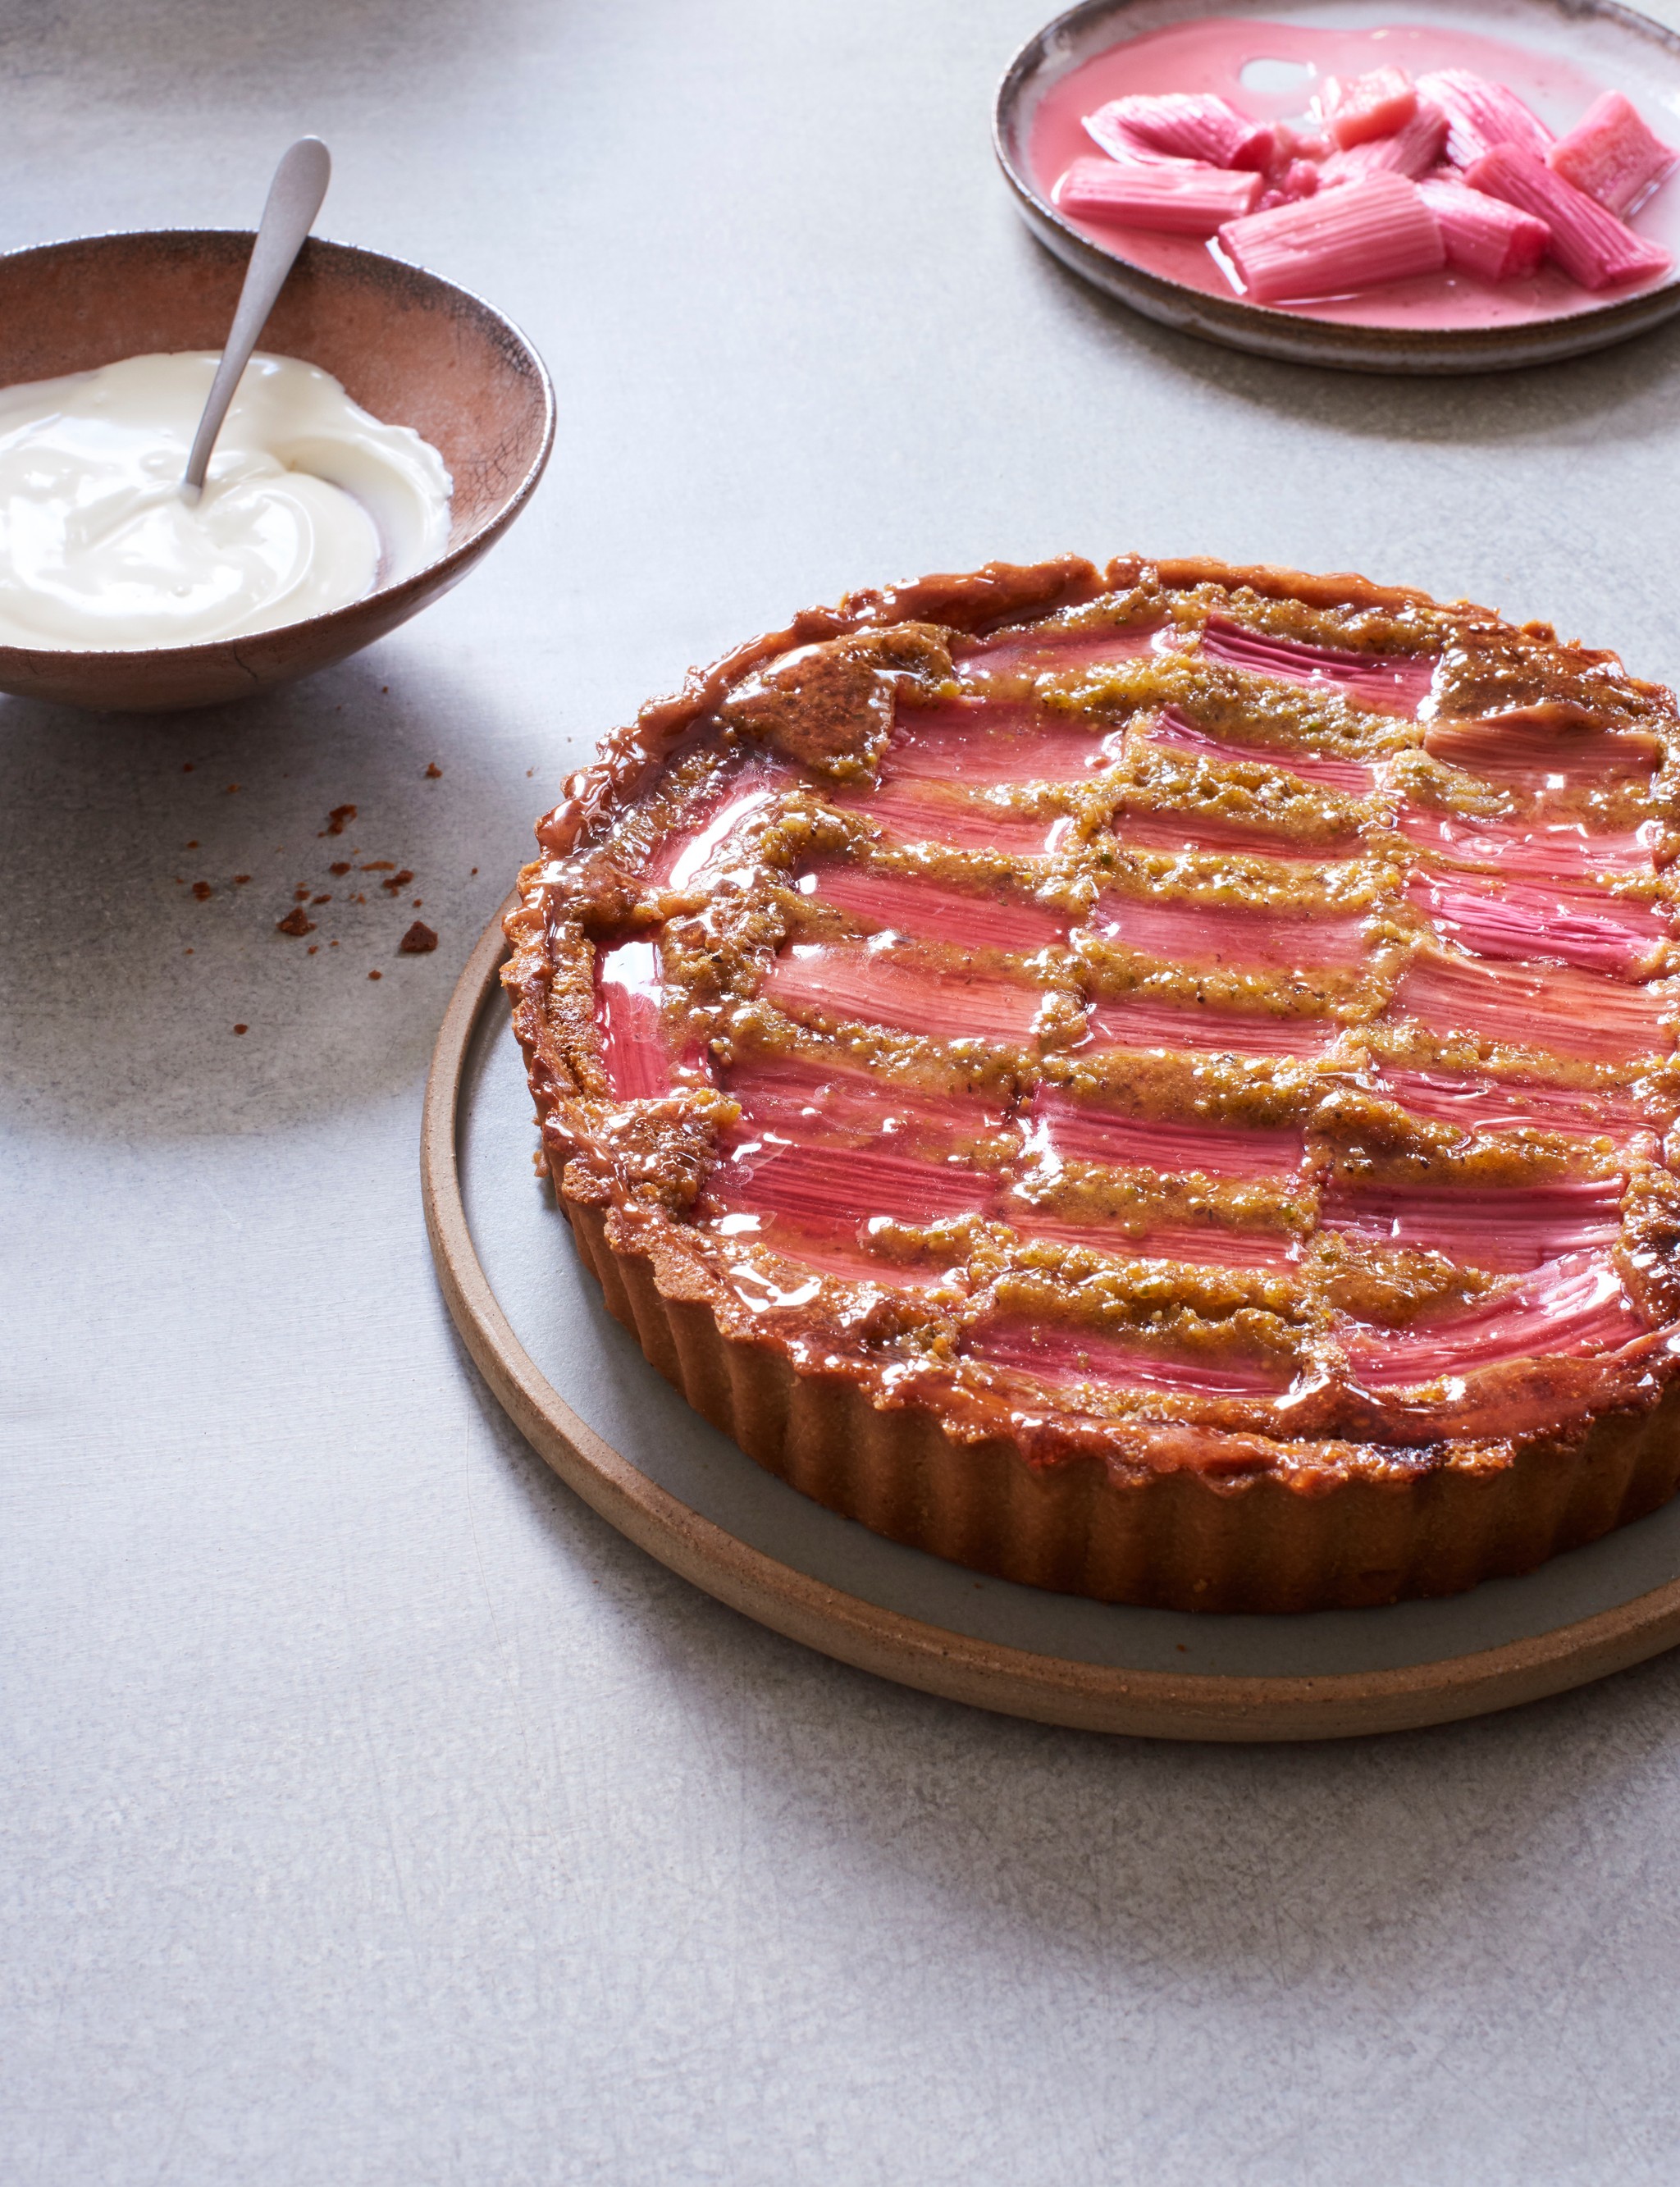 rhubarb and pistachio tart in foreground, with plate of rhubarb at the back